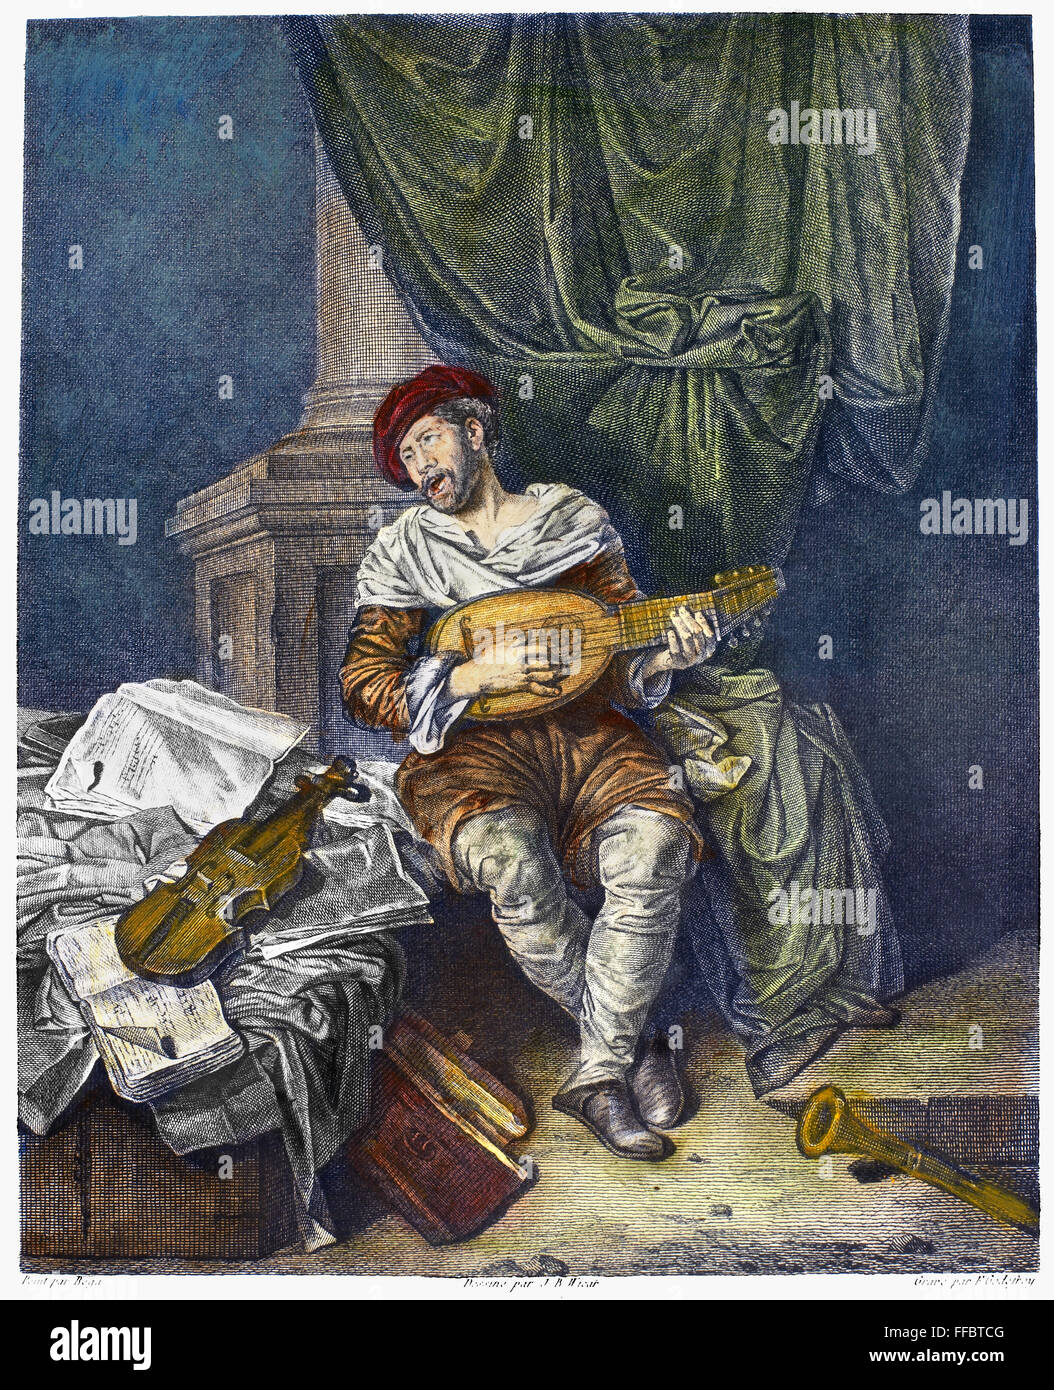 GUITAR PLAYER. /nLine engraving, French, 18th century, after a painting by Cornelis Bega (1620-1664). Stock Photo